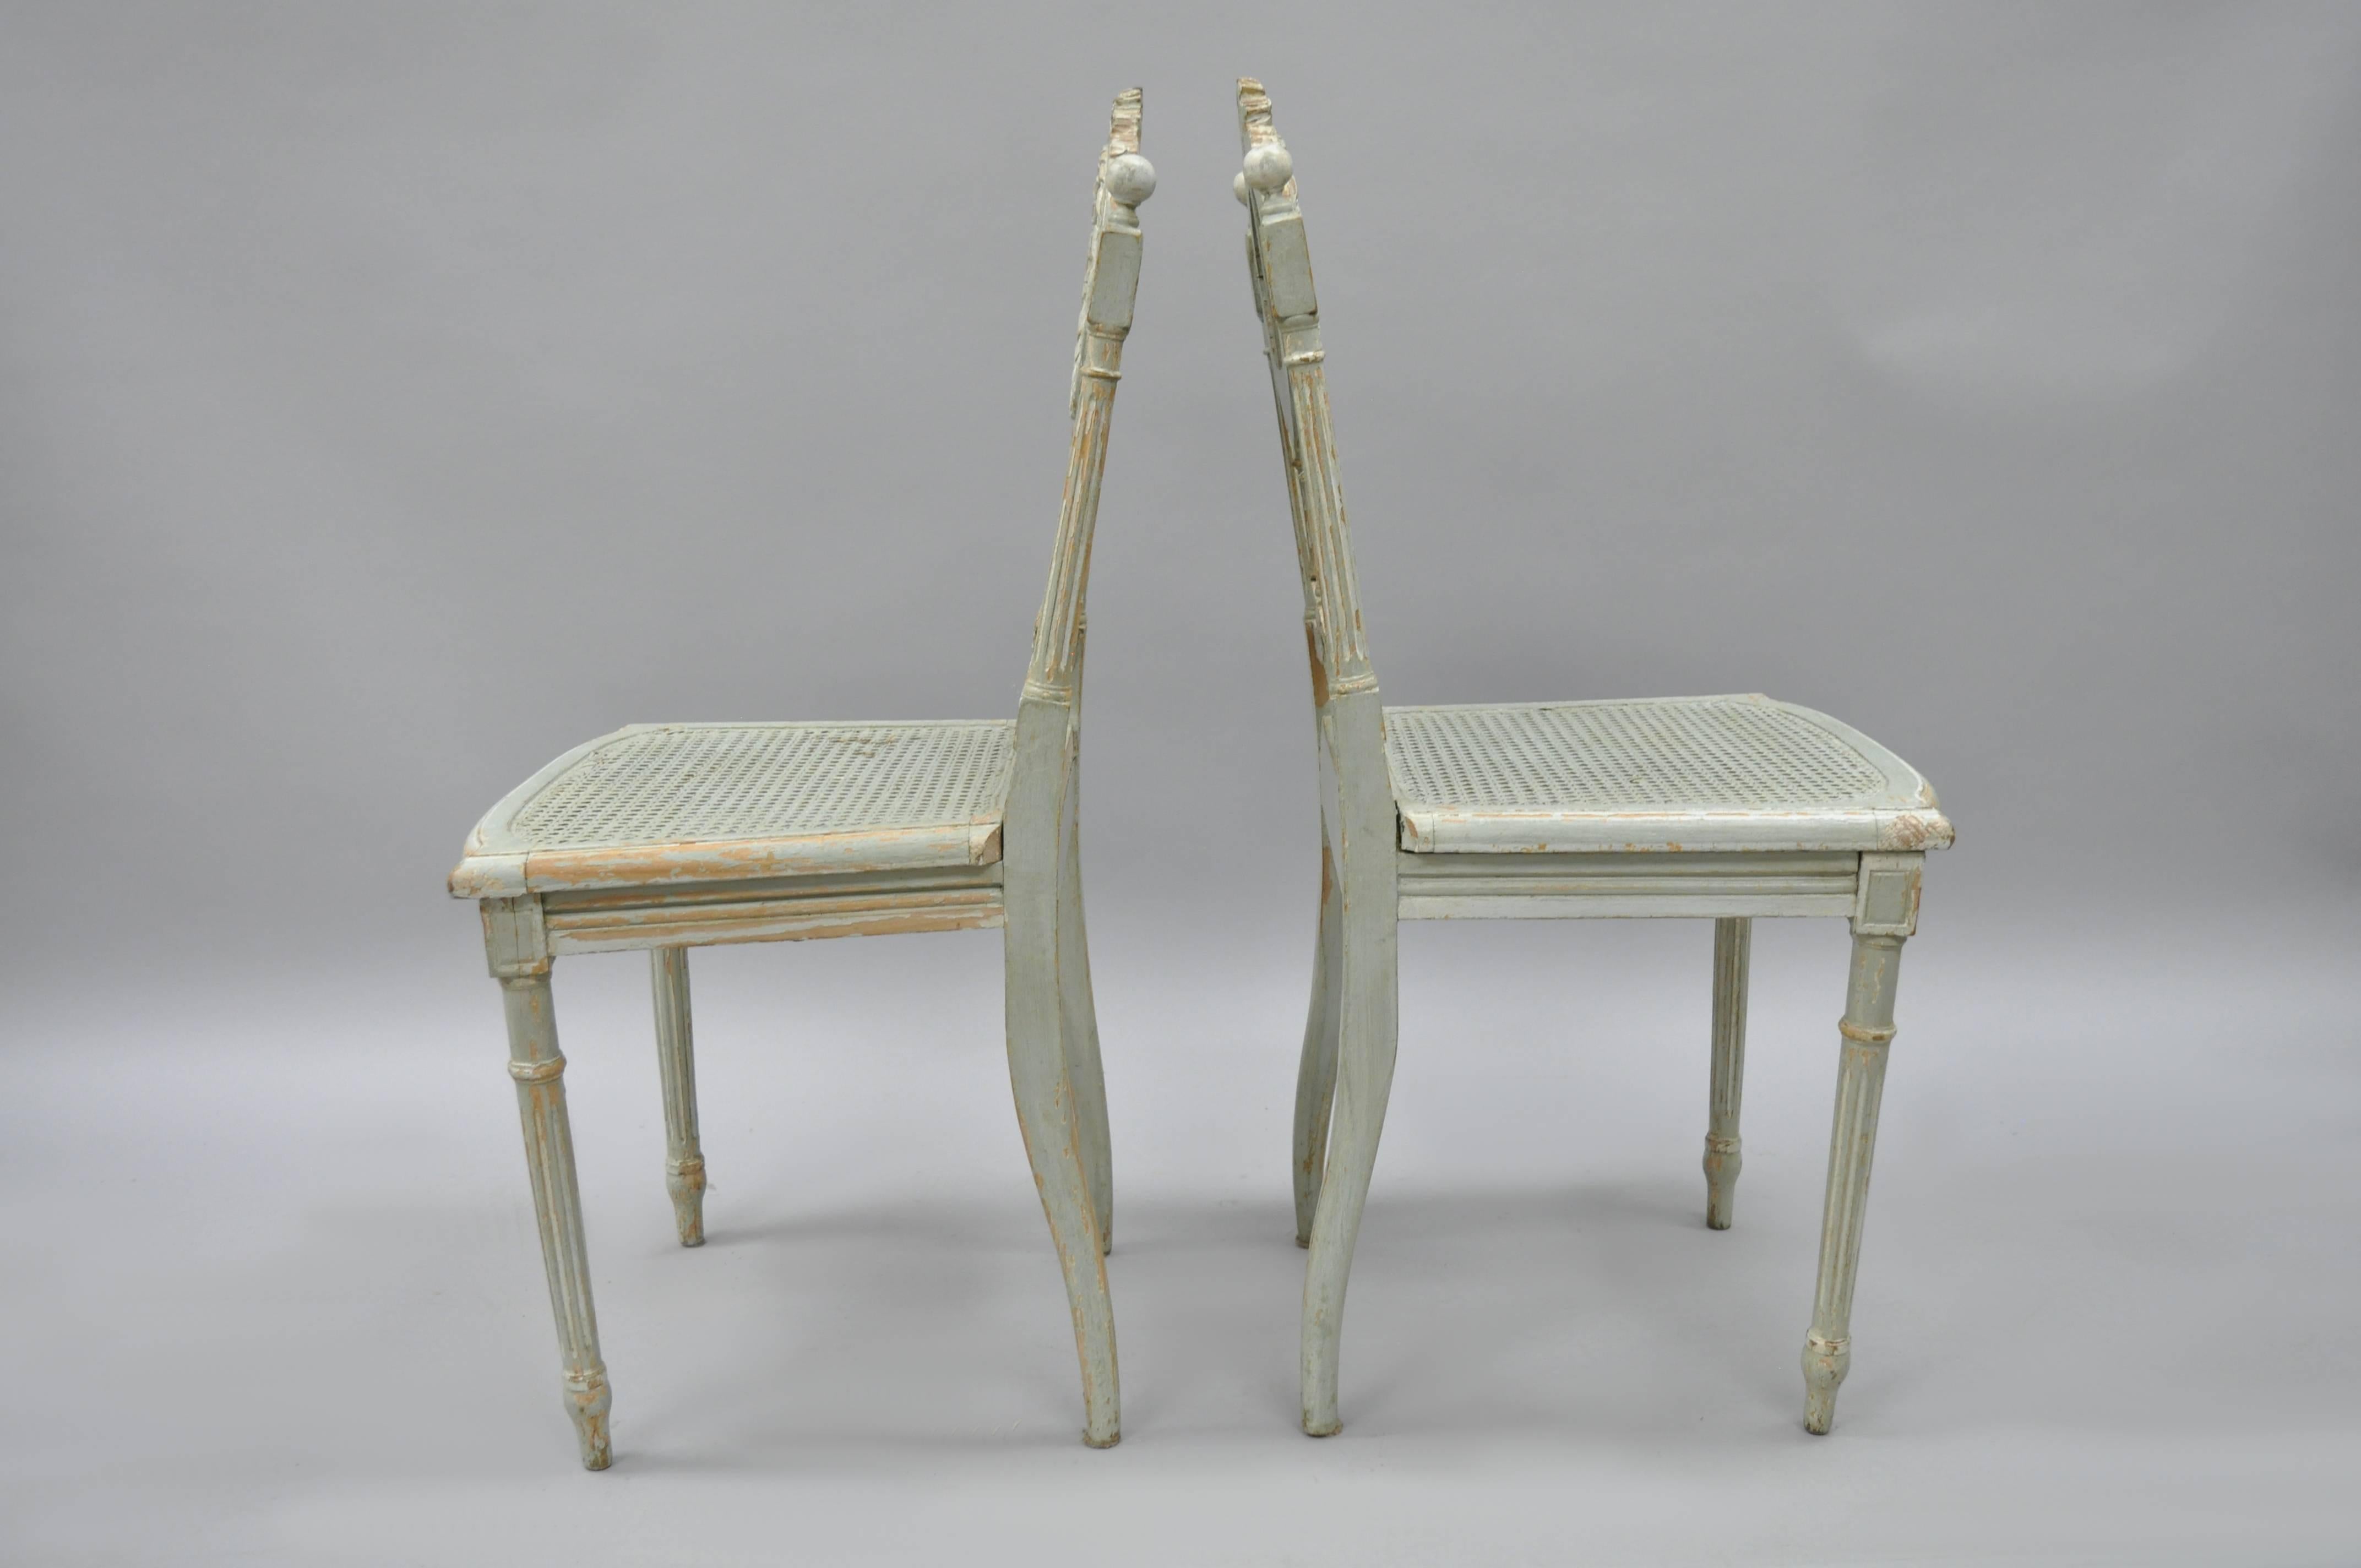 Early 20th Century Pair of French Louis XVI Style Blue Distress Painted Parlor or Salon Side Chairs